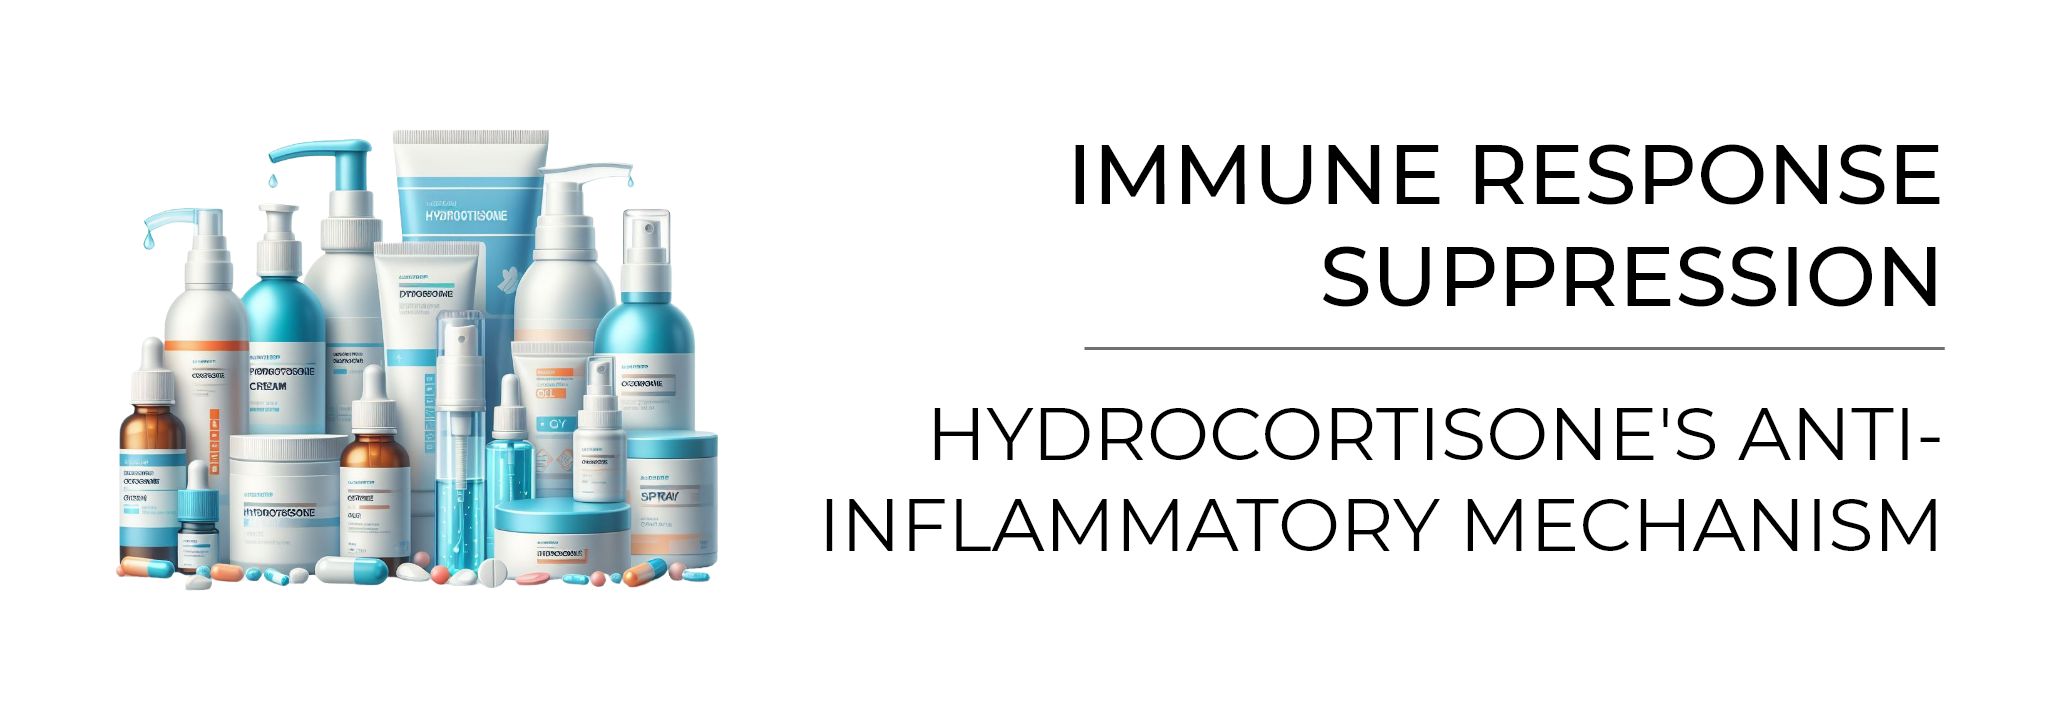 Banner that highlights the main mode of action of hydrocortisone for seborrheic dermatitis - immune response suppression